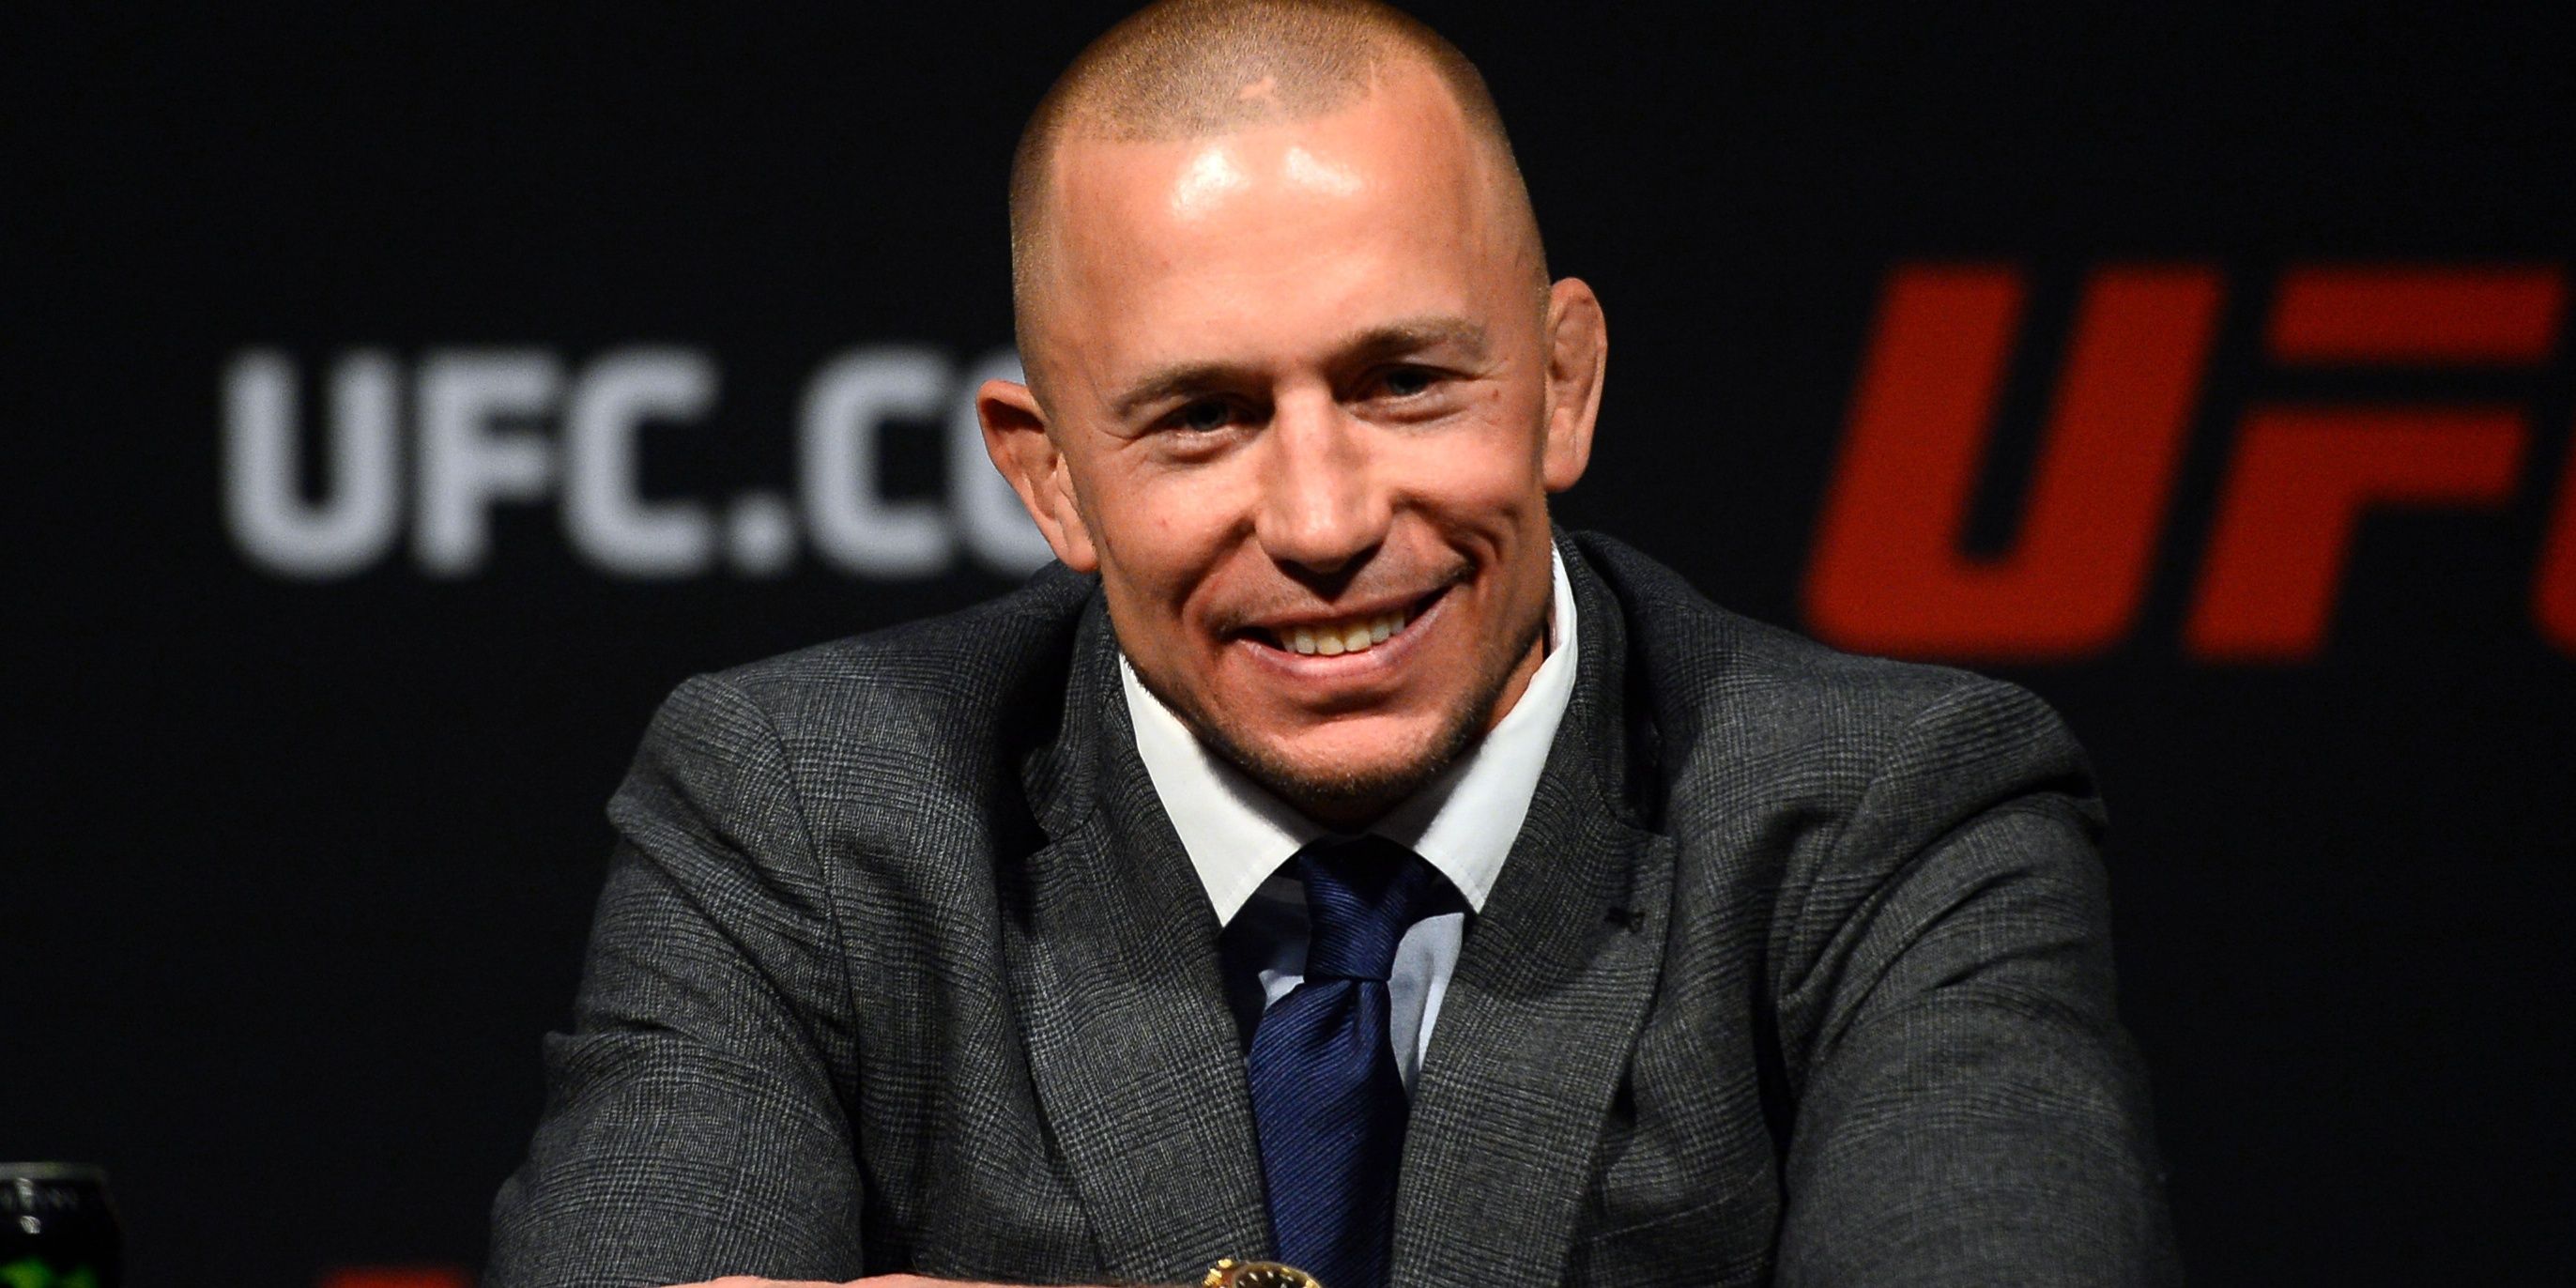 georges-st-pierre-in-a-suit-at-a-press-conference